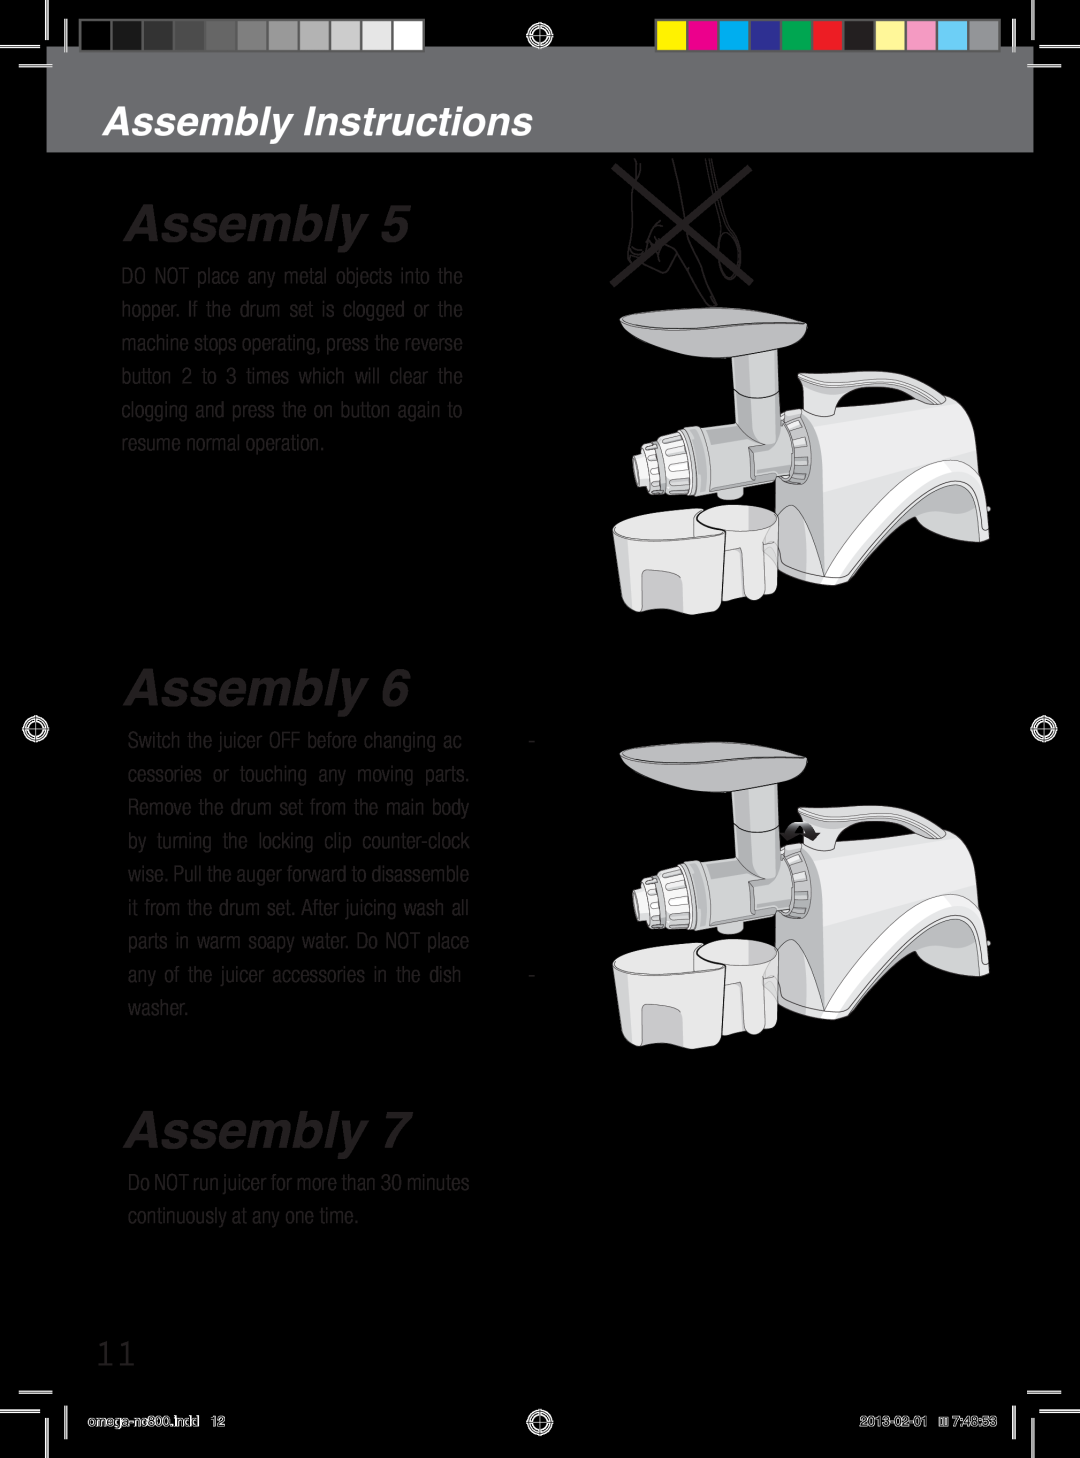 Omega NC800 Assembly Instructions, cessories or touching any moving parts, by turning the locking clip counter-clock 